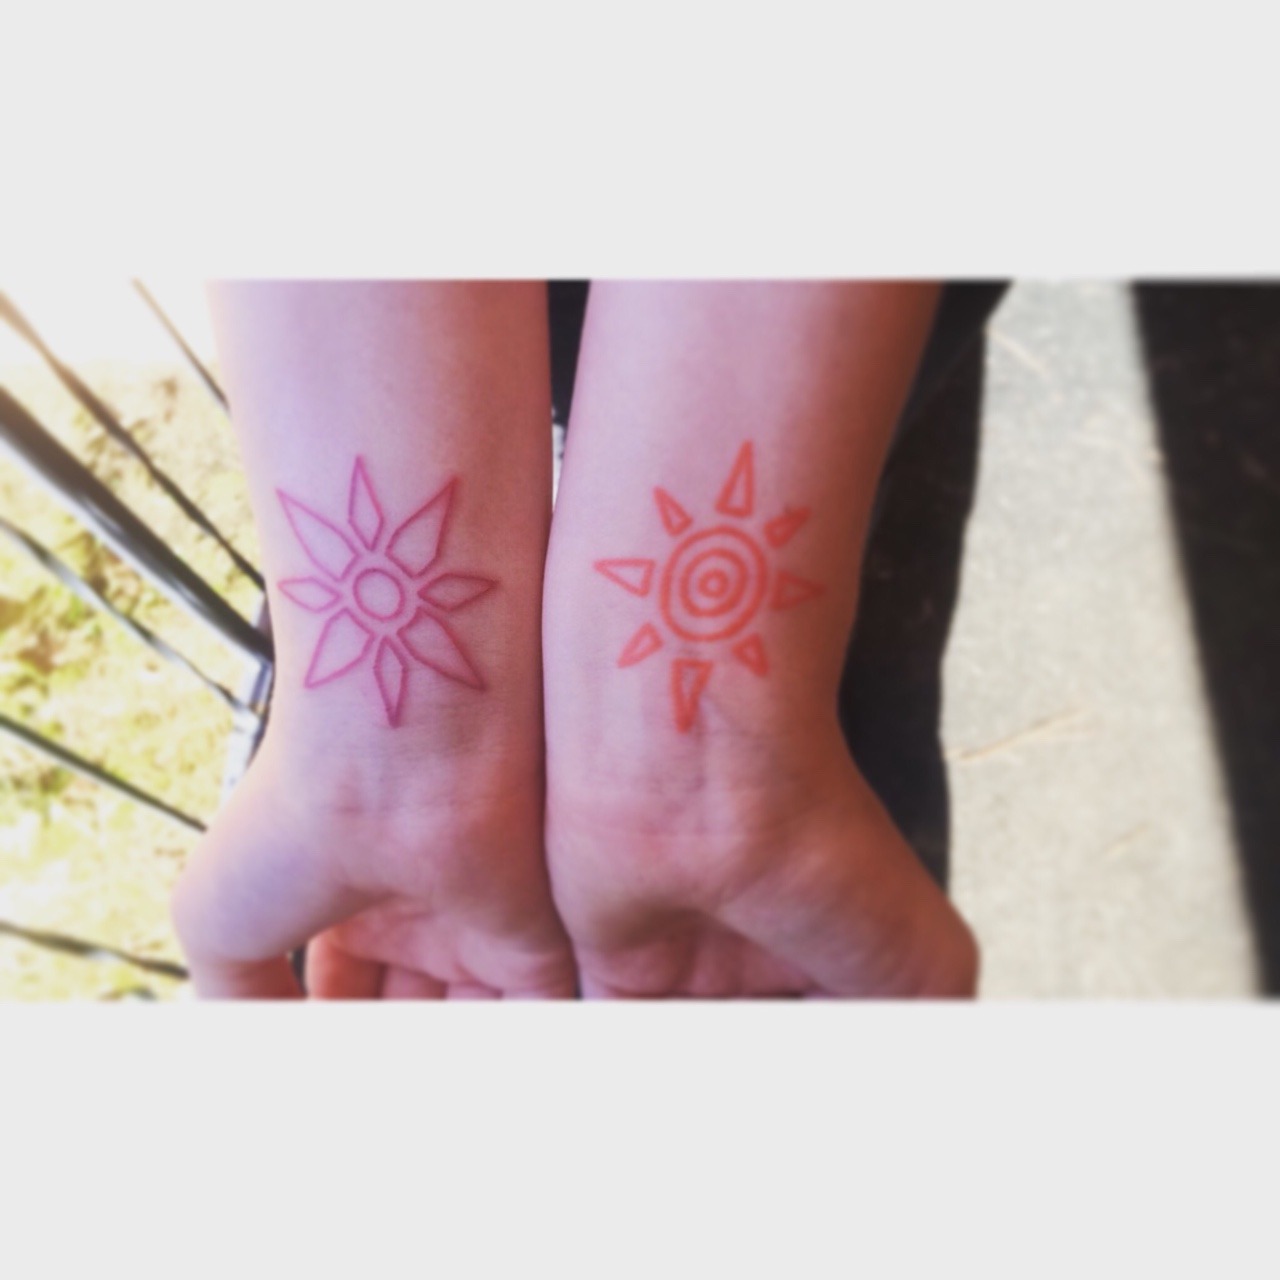 Unique + Geeky Tattoo Ideas — The crests from Digimon, which the  DigiDestined...